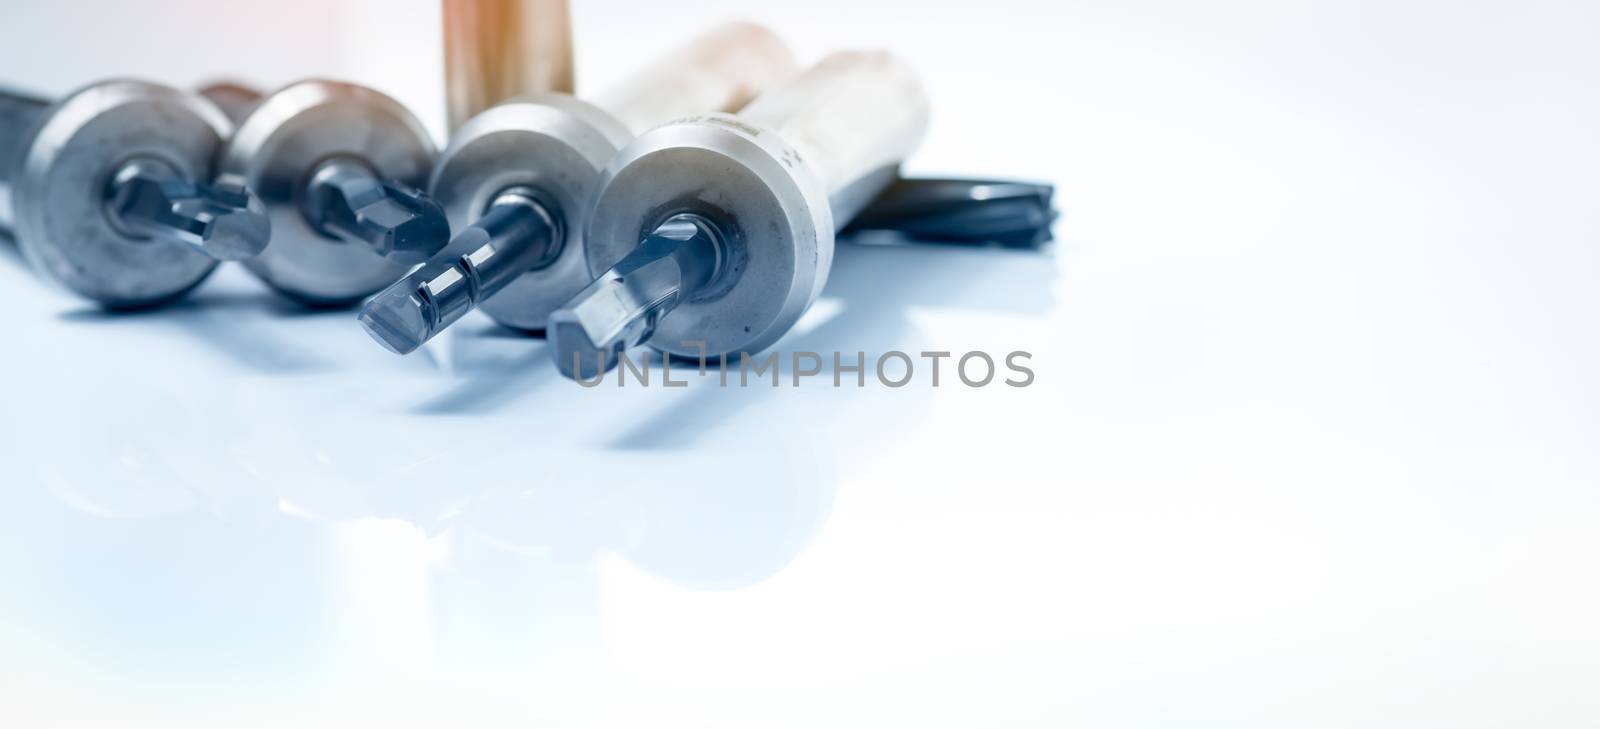 Special tools isolated on white background. Made to order specia by Fahroni